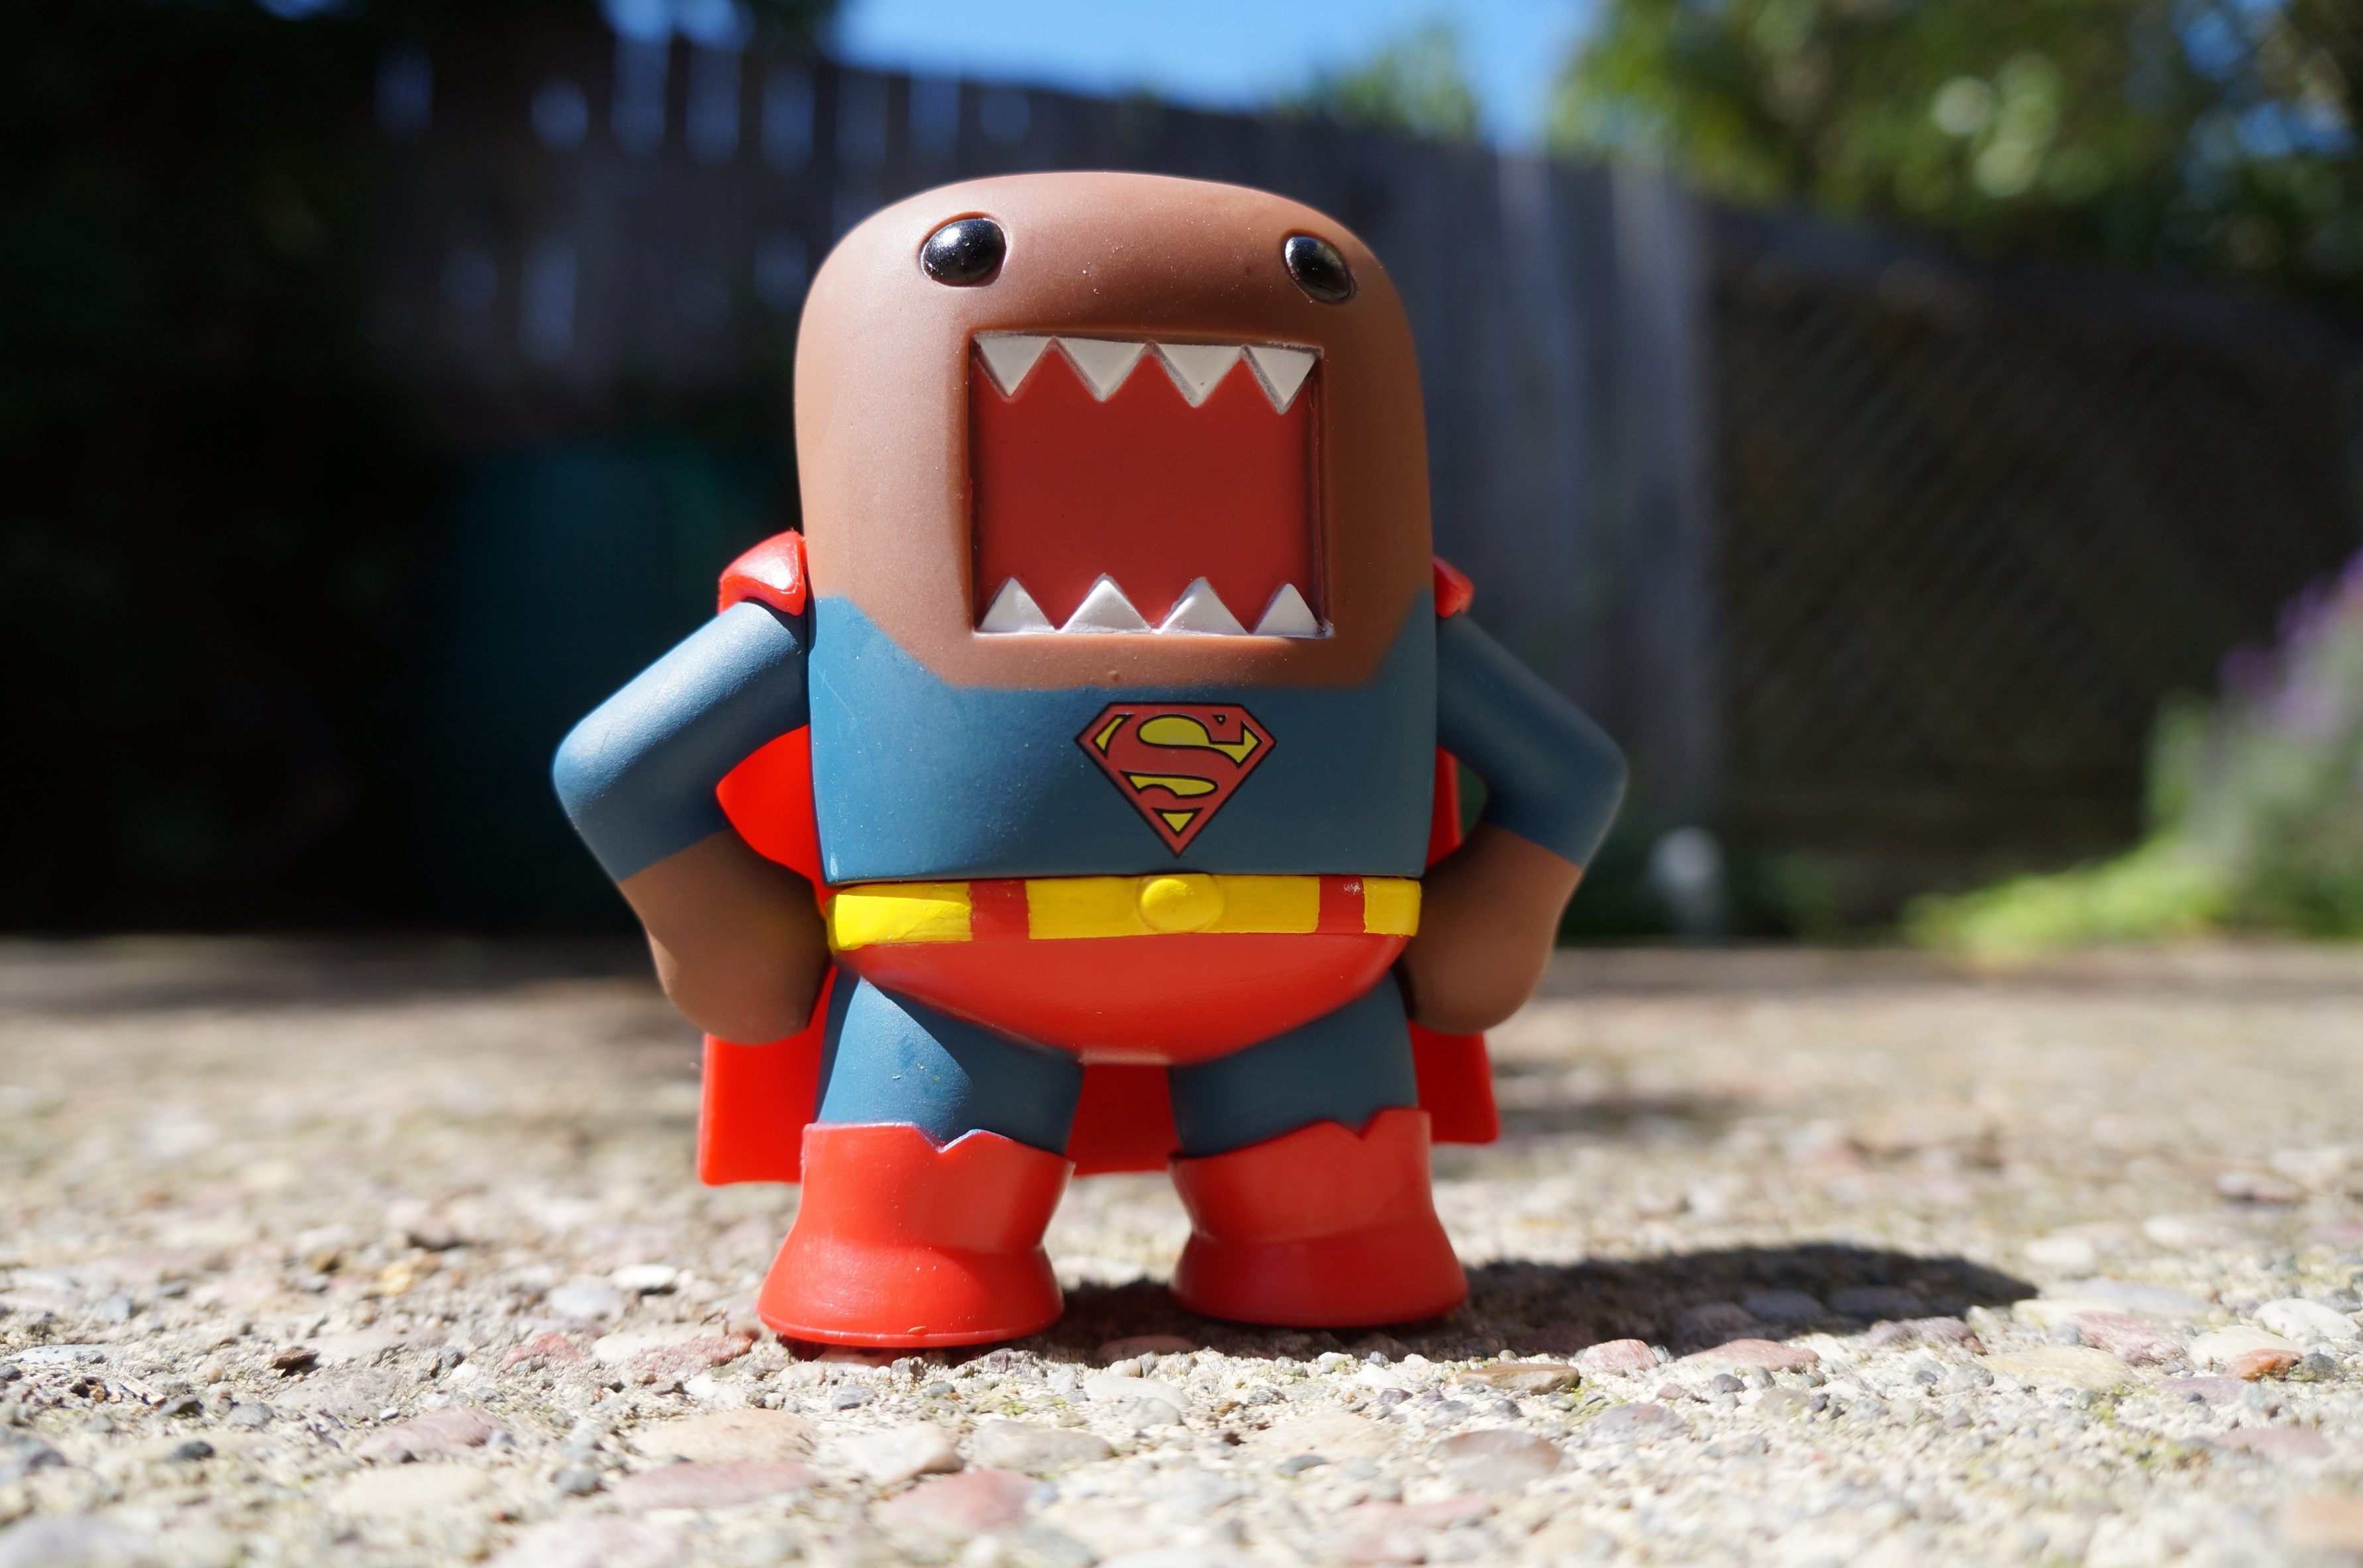 Domo Wallpapers HD - HD Wallpapers Backgrounds of Your Choice